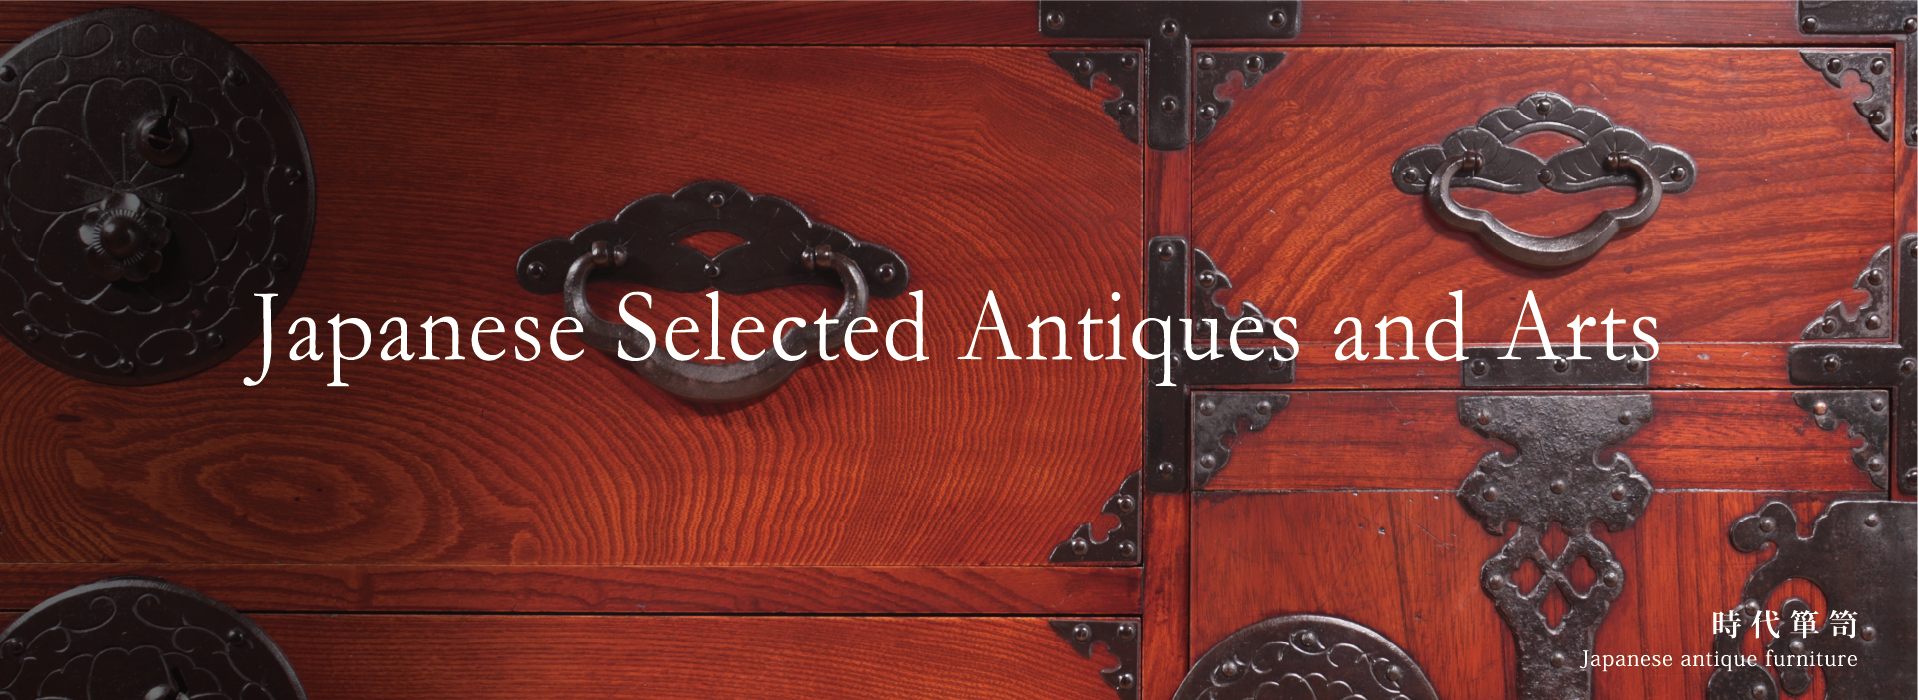 Japanese Selected Antiques and Arts 時代箪笥 Japanese antique furniture